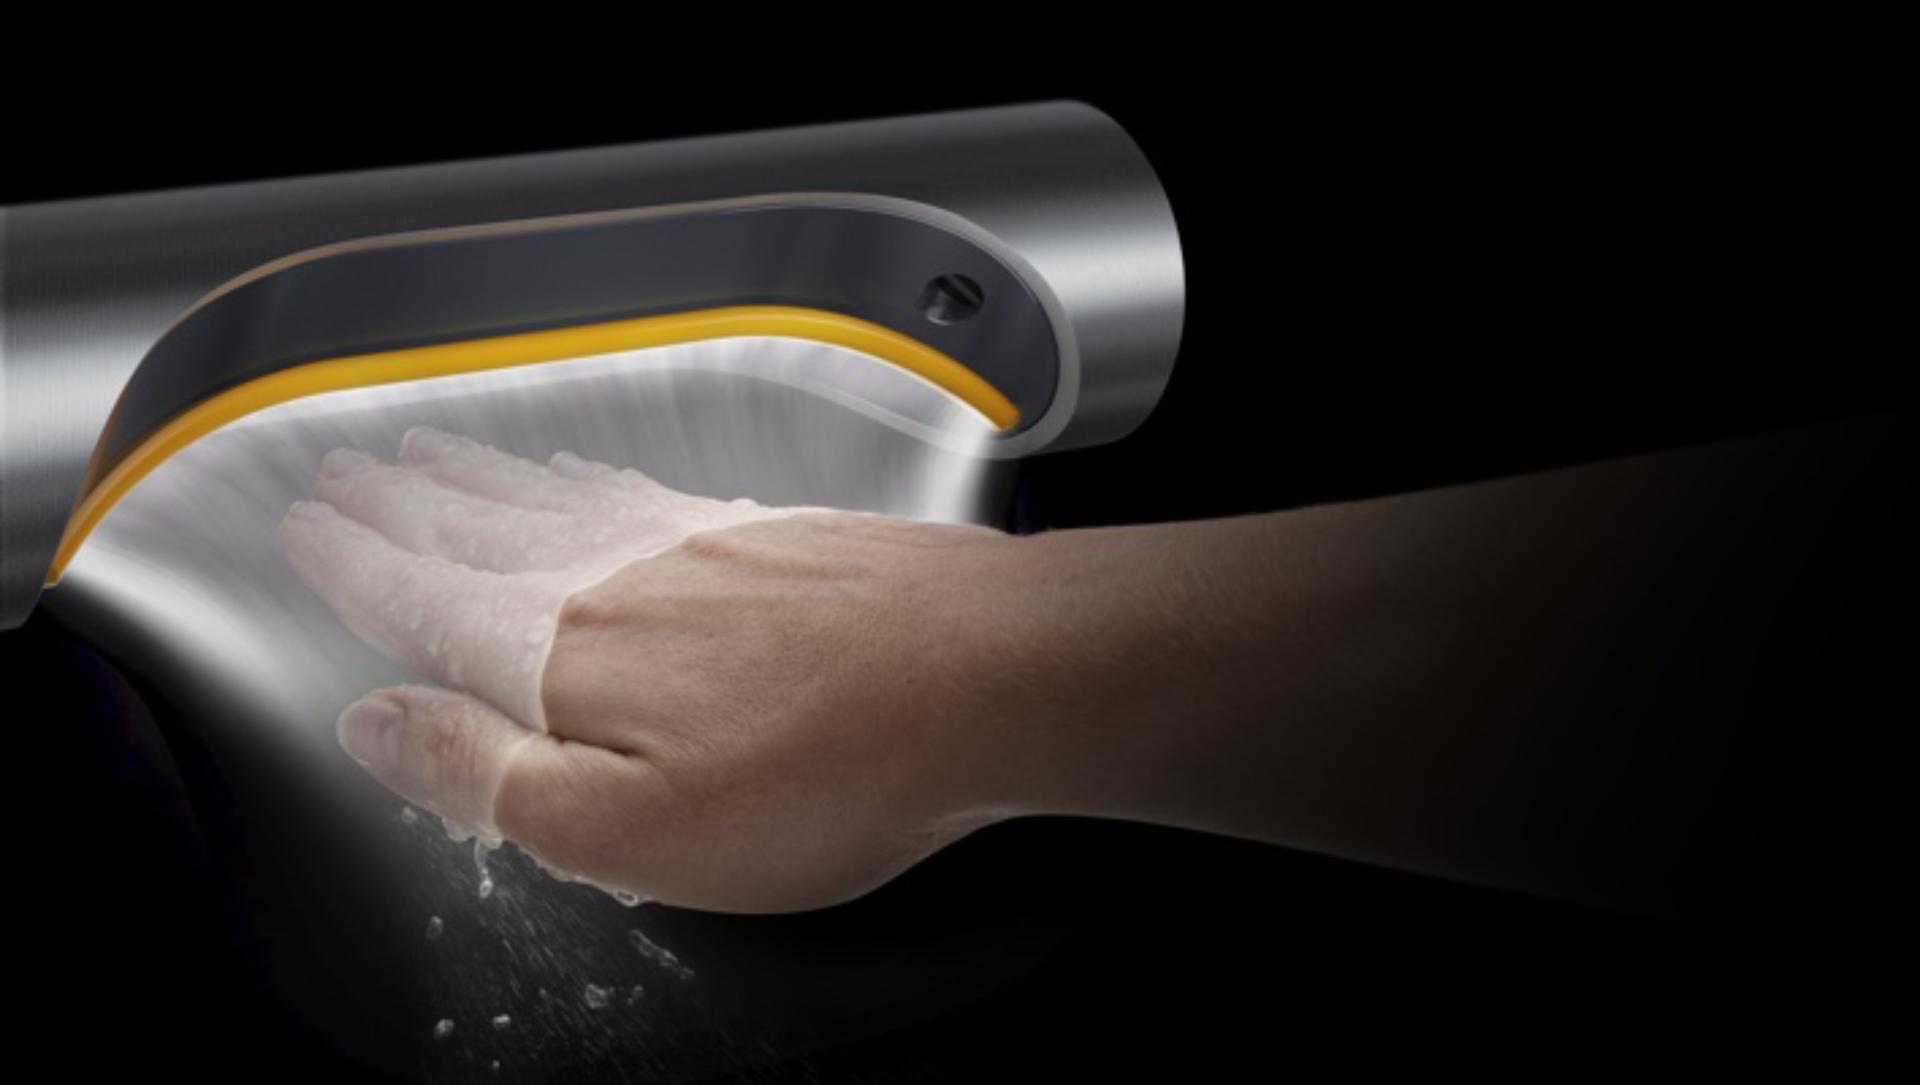 Close up of the Dyson Airblade 9kJ hand dryer's Curved Blade™ design.